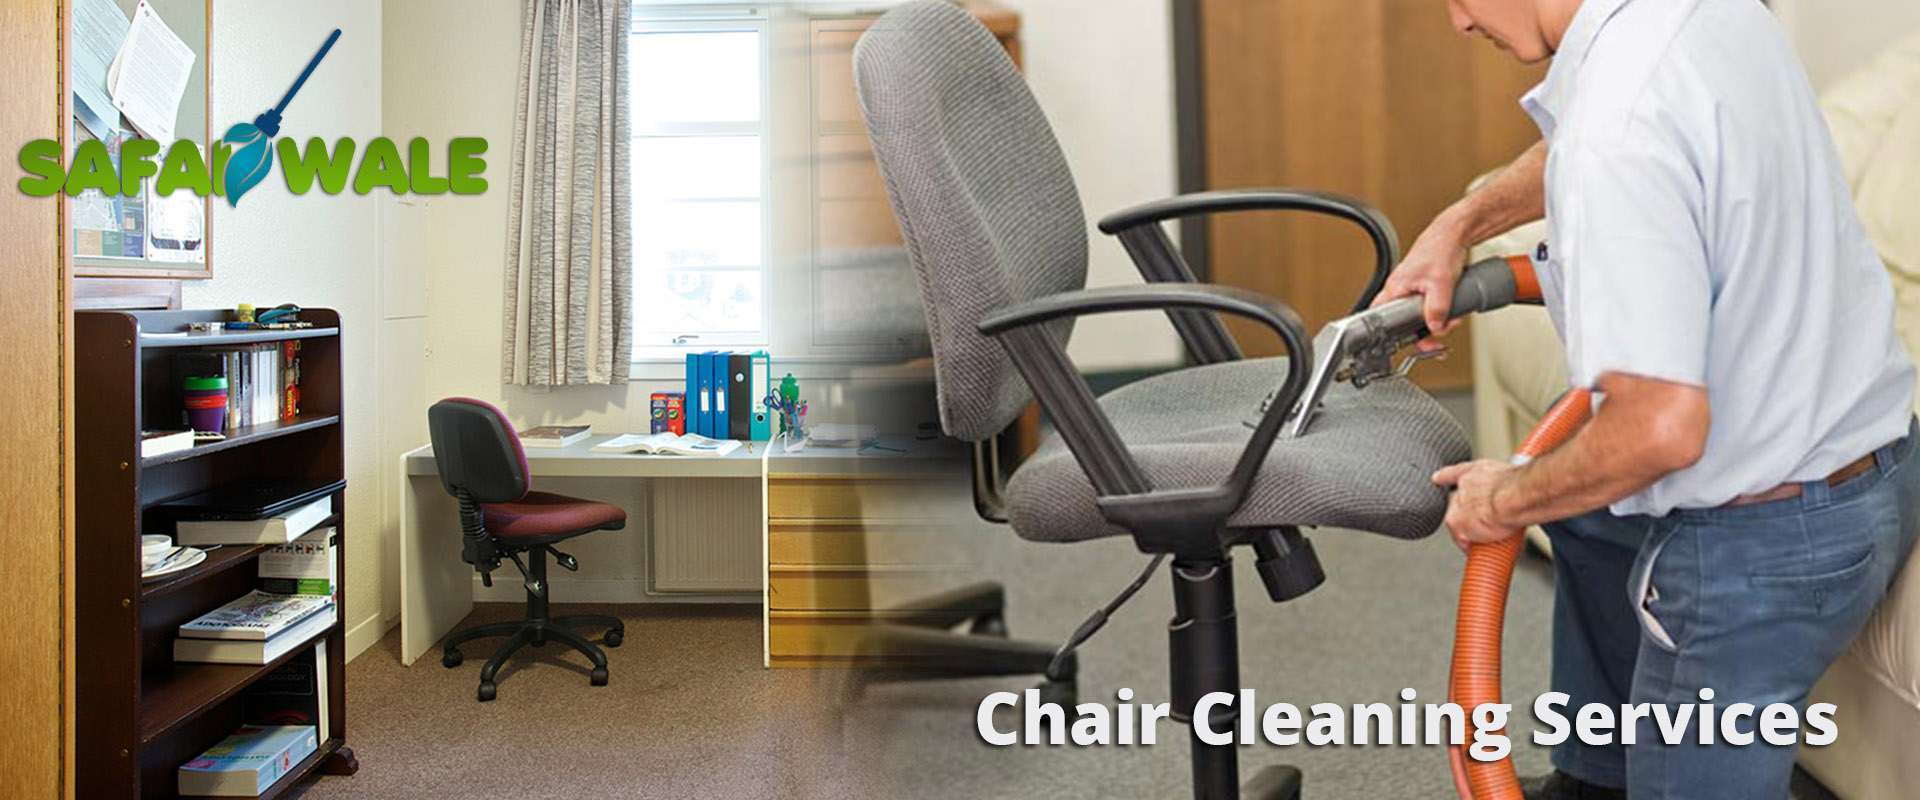 chair cleaning services in noida